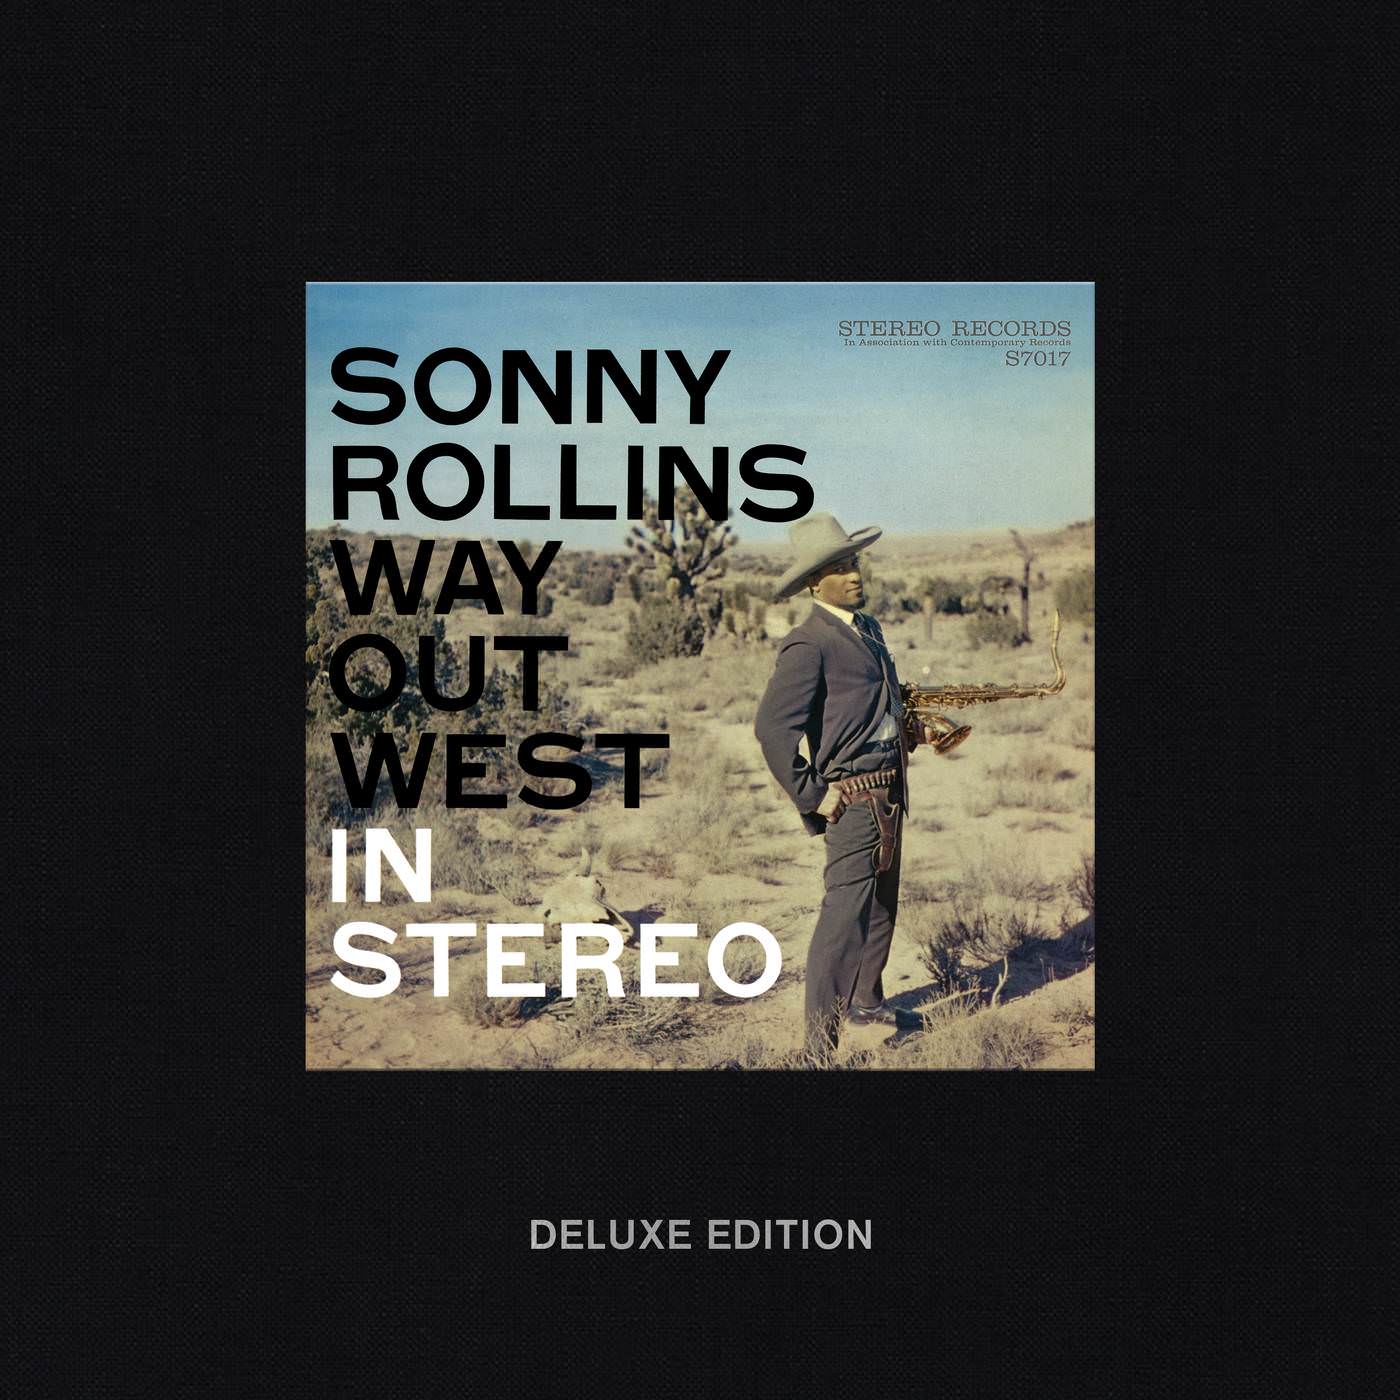 Sonny Rollins - Way Out West (1957) {Deluxe Edition 2018} [Mora FLAC 24bit/192kHz]